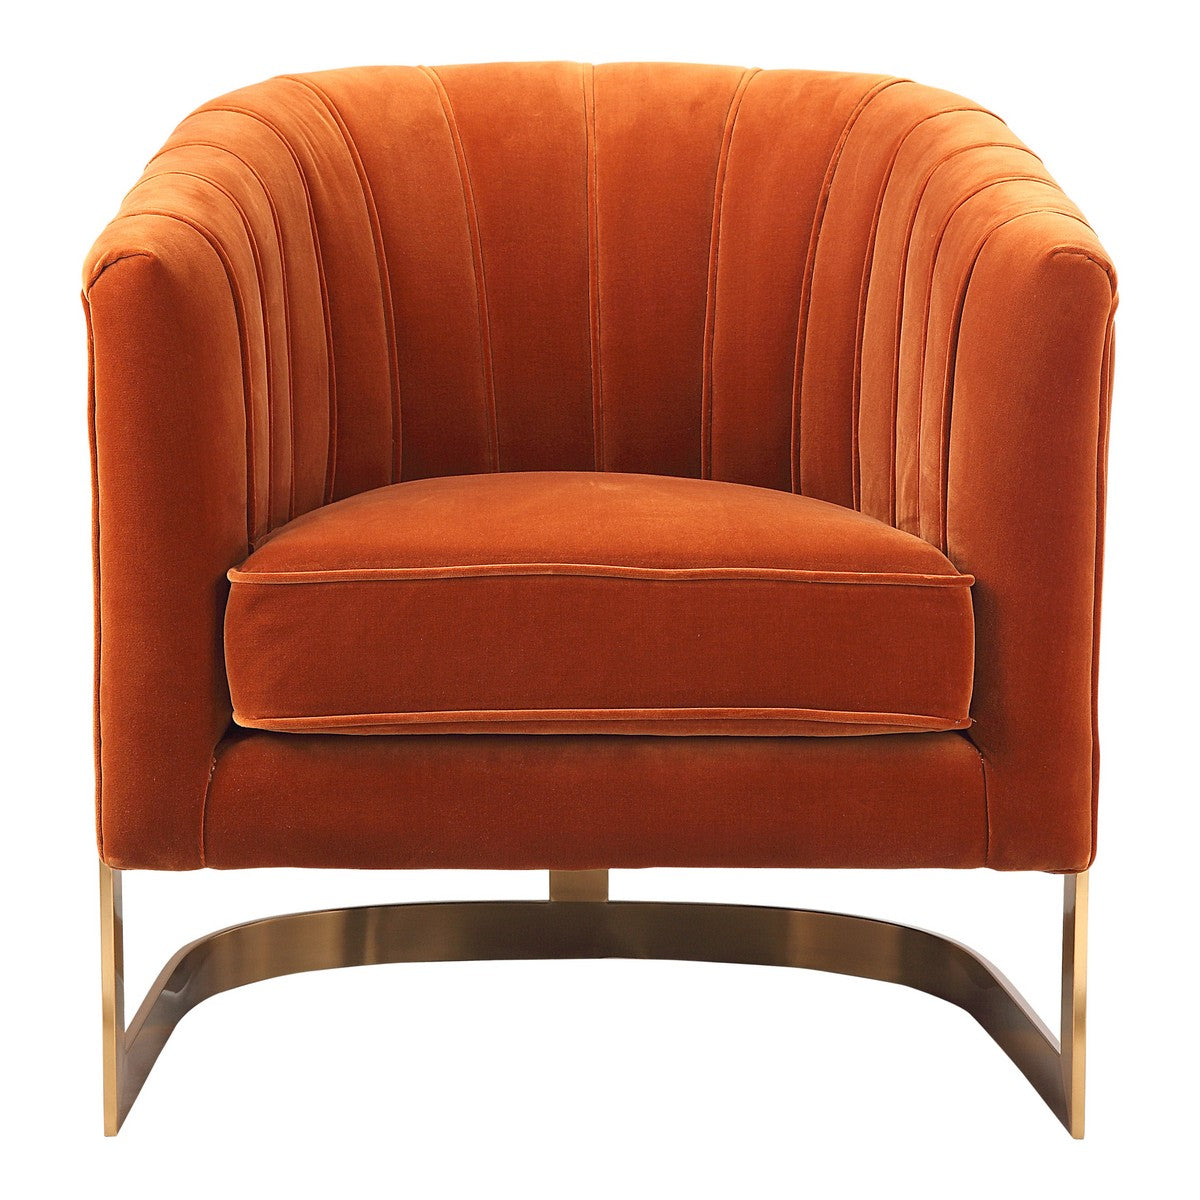 Moe's Home Collection Carr Arm Chair Orange - ME-1044-12 - Moe's Home Collection - lounge chairs - Minimal And Modern - 1